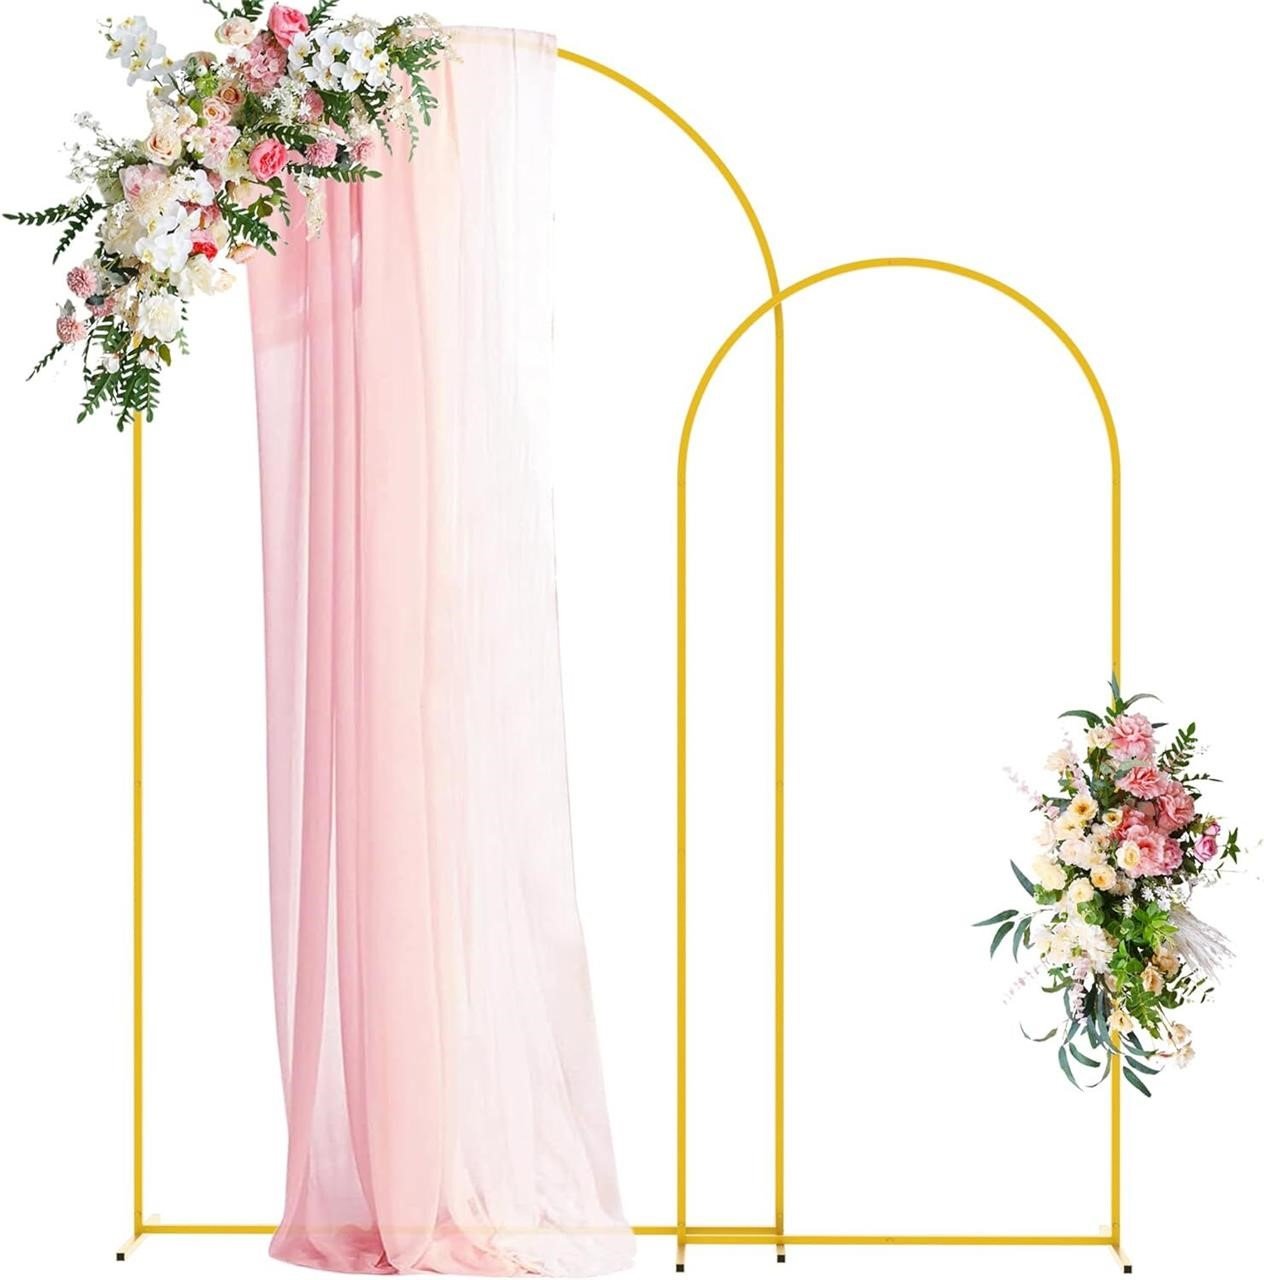 Wokceer Wedding Arch Stand: 7.2FT/6FT Set